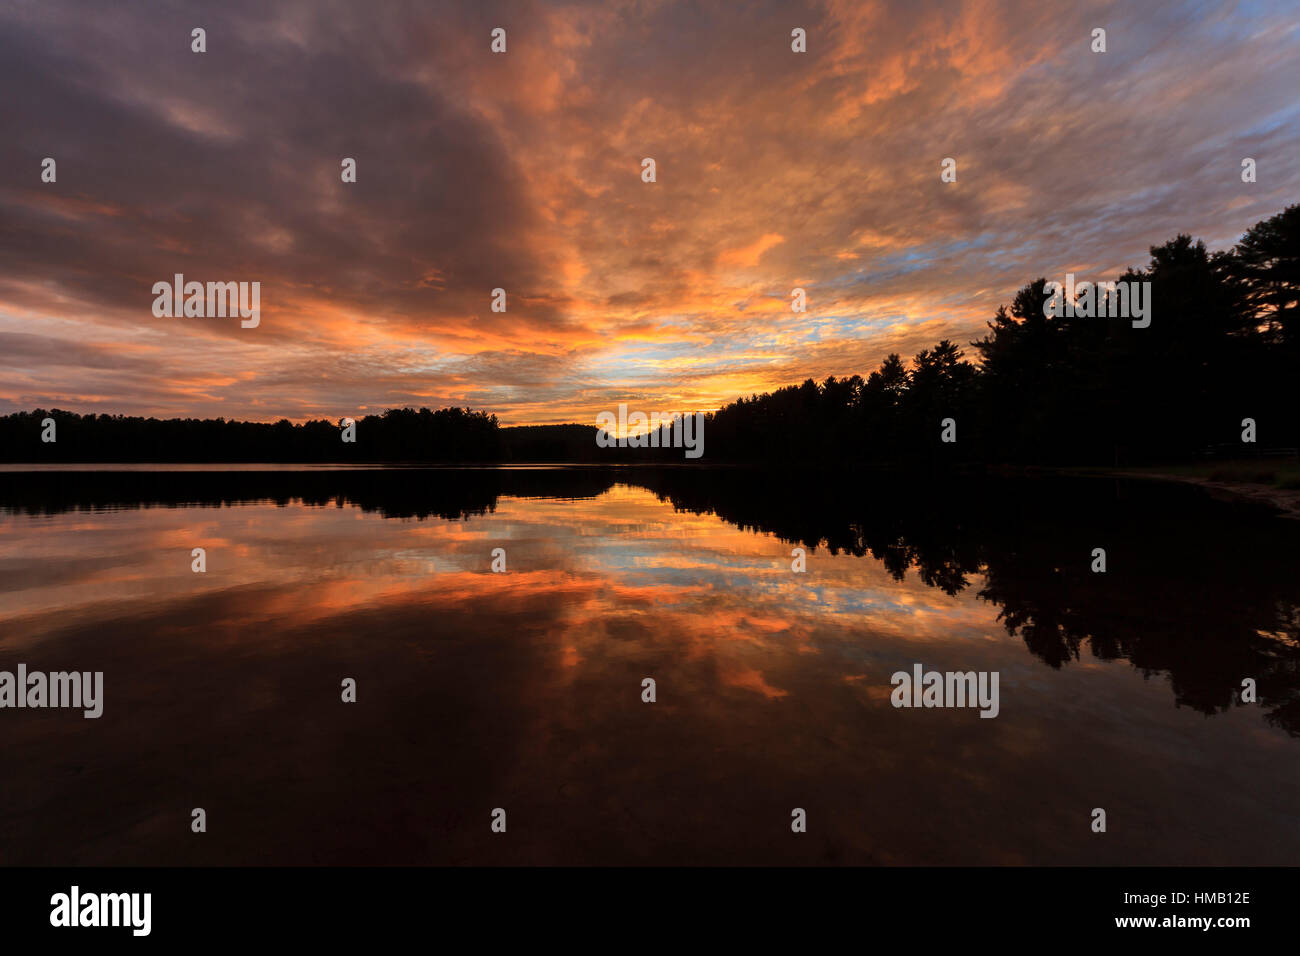 Sunset at Mew Lake, Algonquin Provincial Park, Ontario Province, Canada Stock Photo